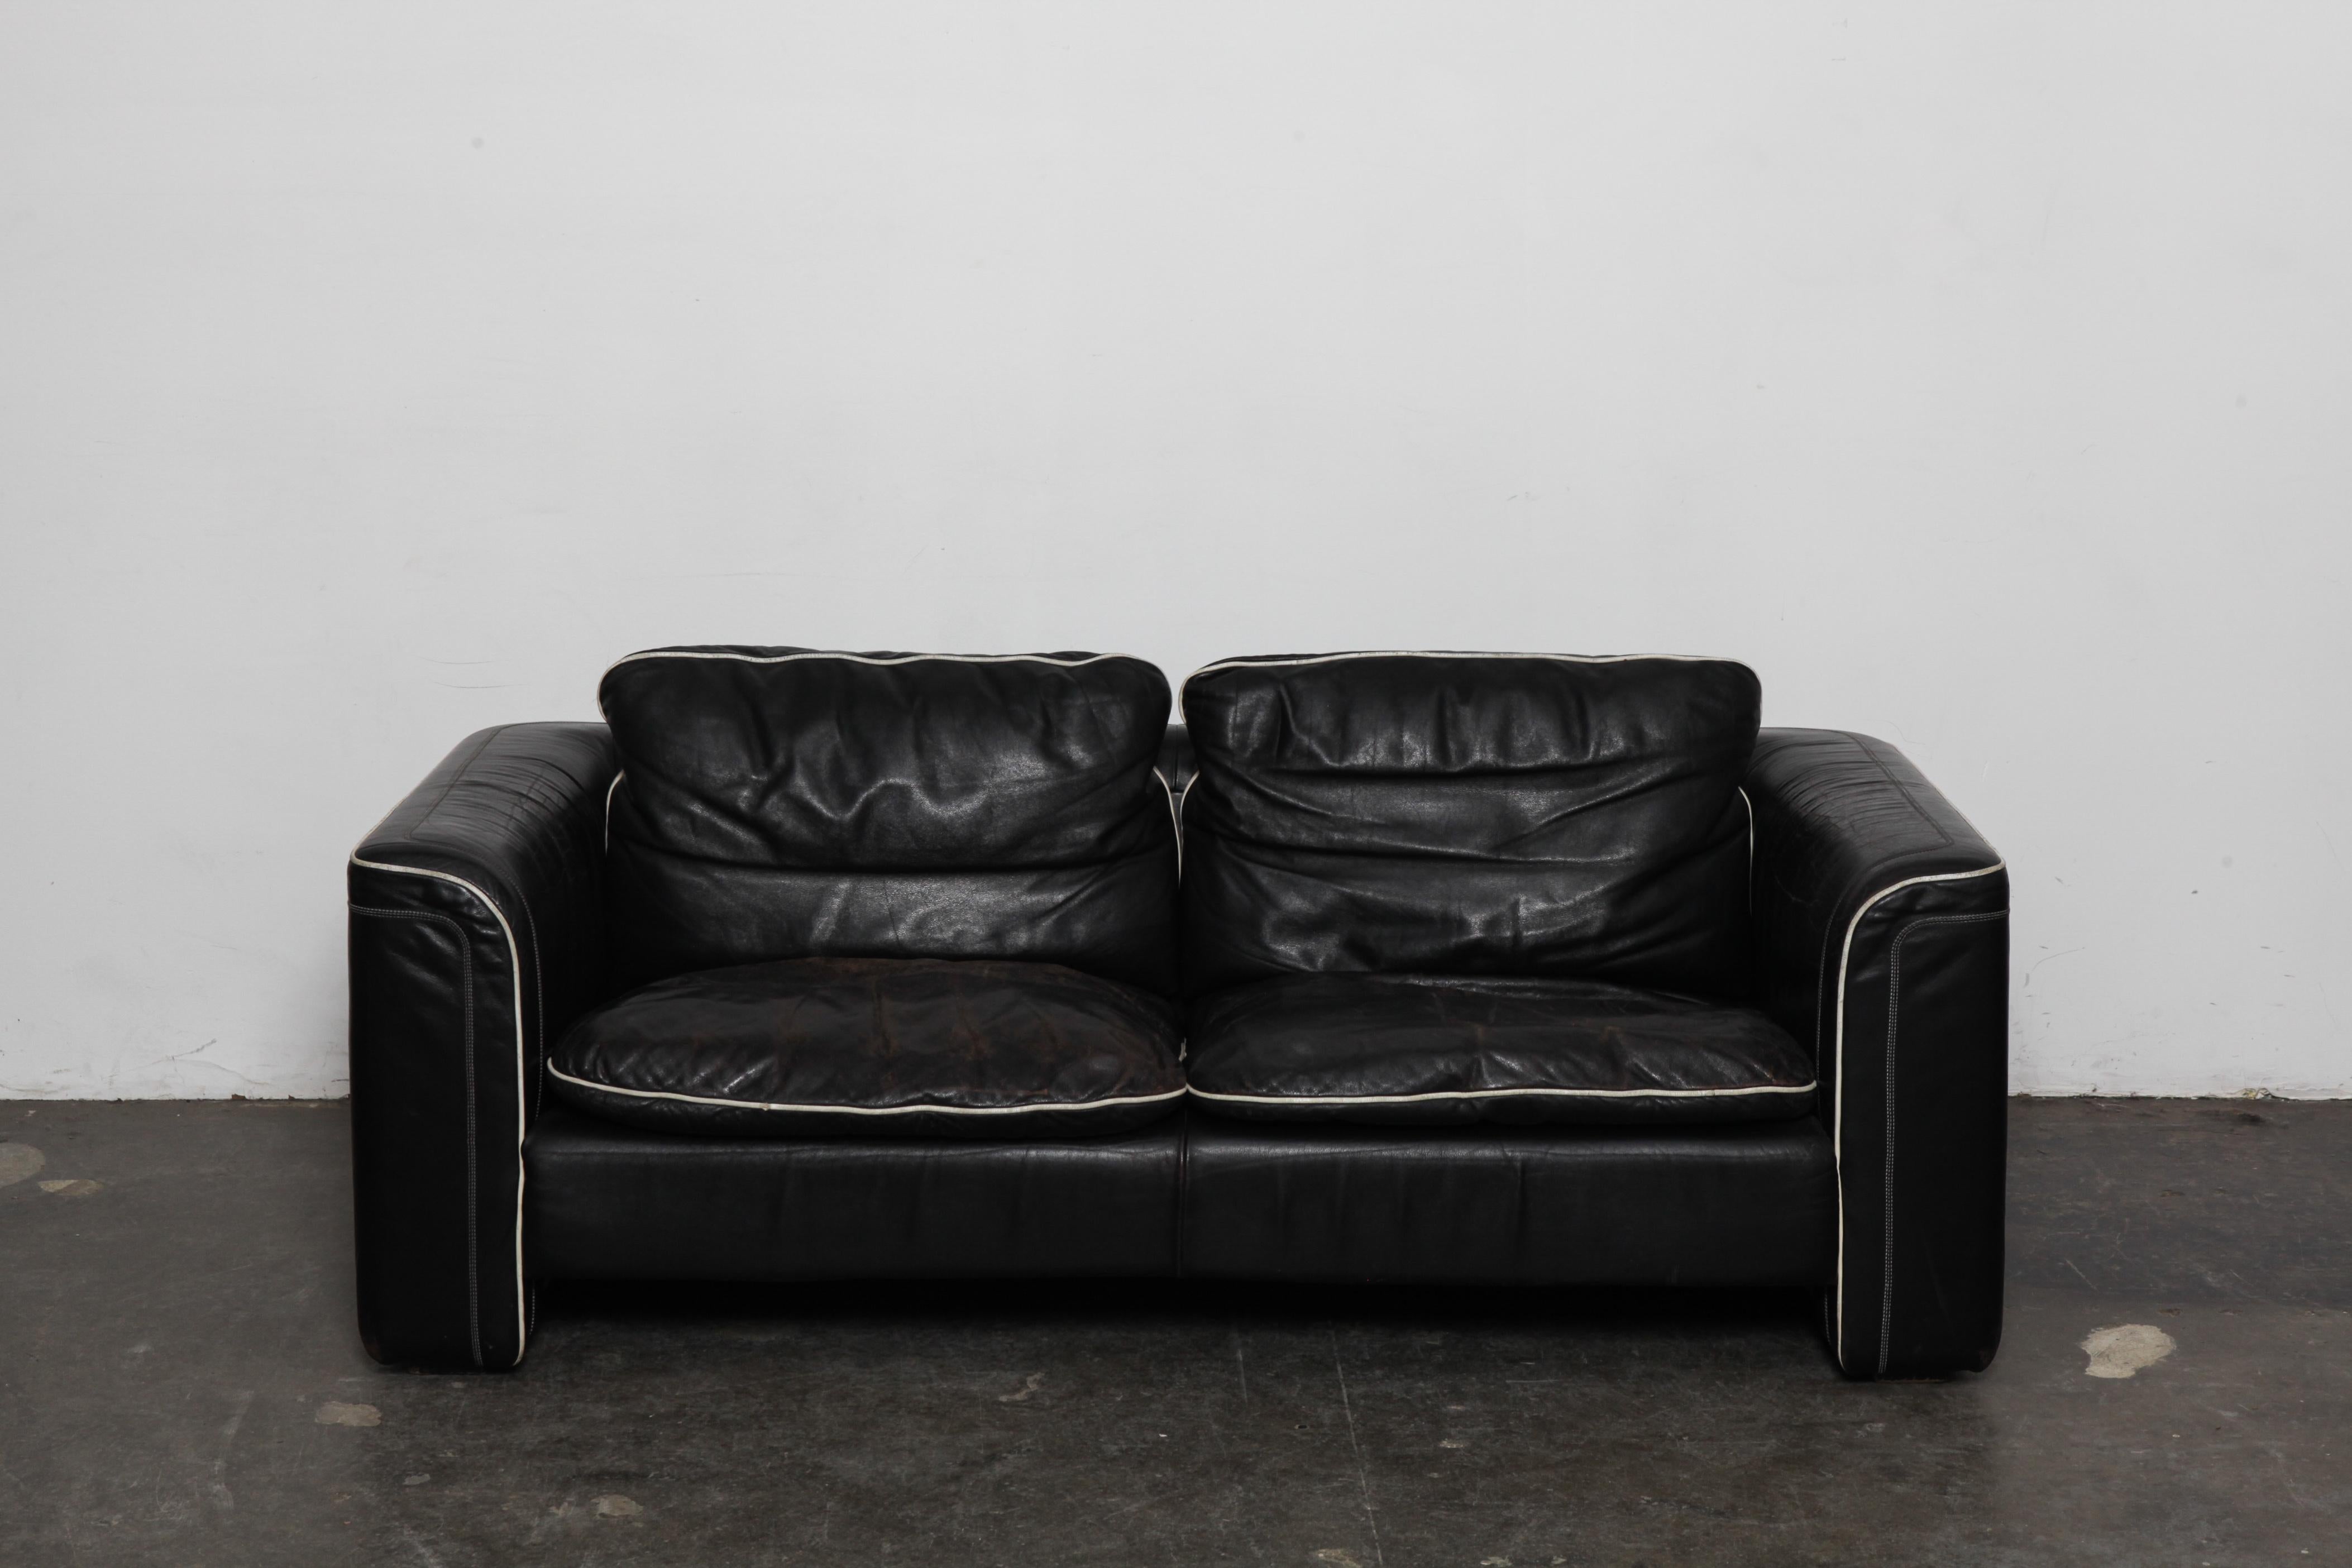 Black leather 2-seat sofa by De Sede with off white piping, in original leather. Swizterland, 1980s. Wear commensurate with age and use but in good vintage condition, no tears.